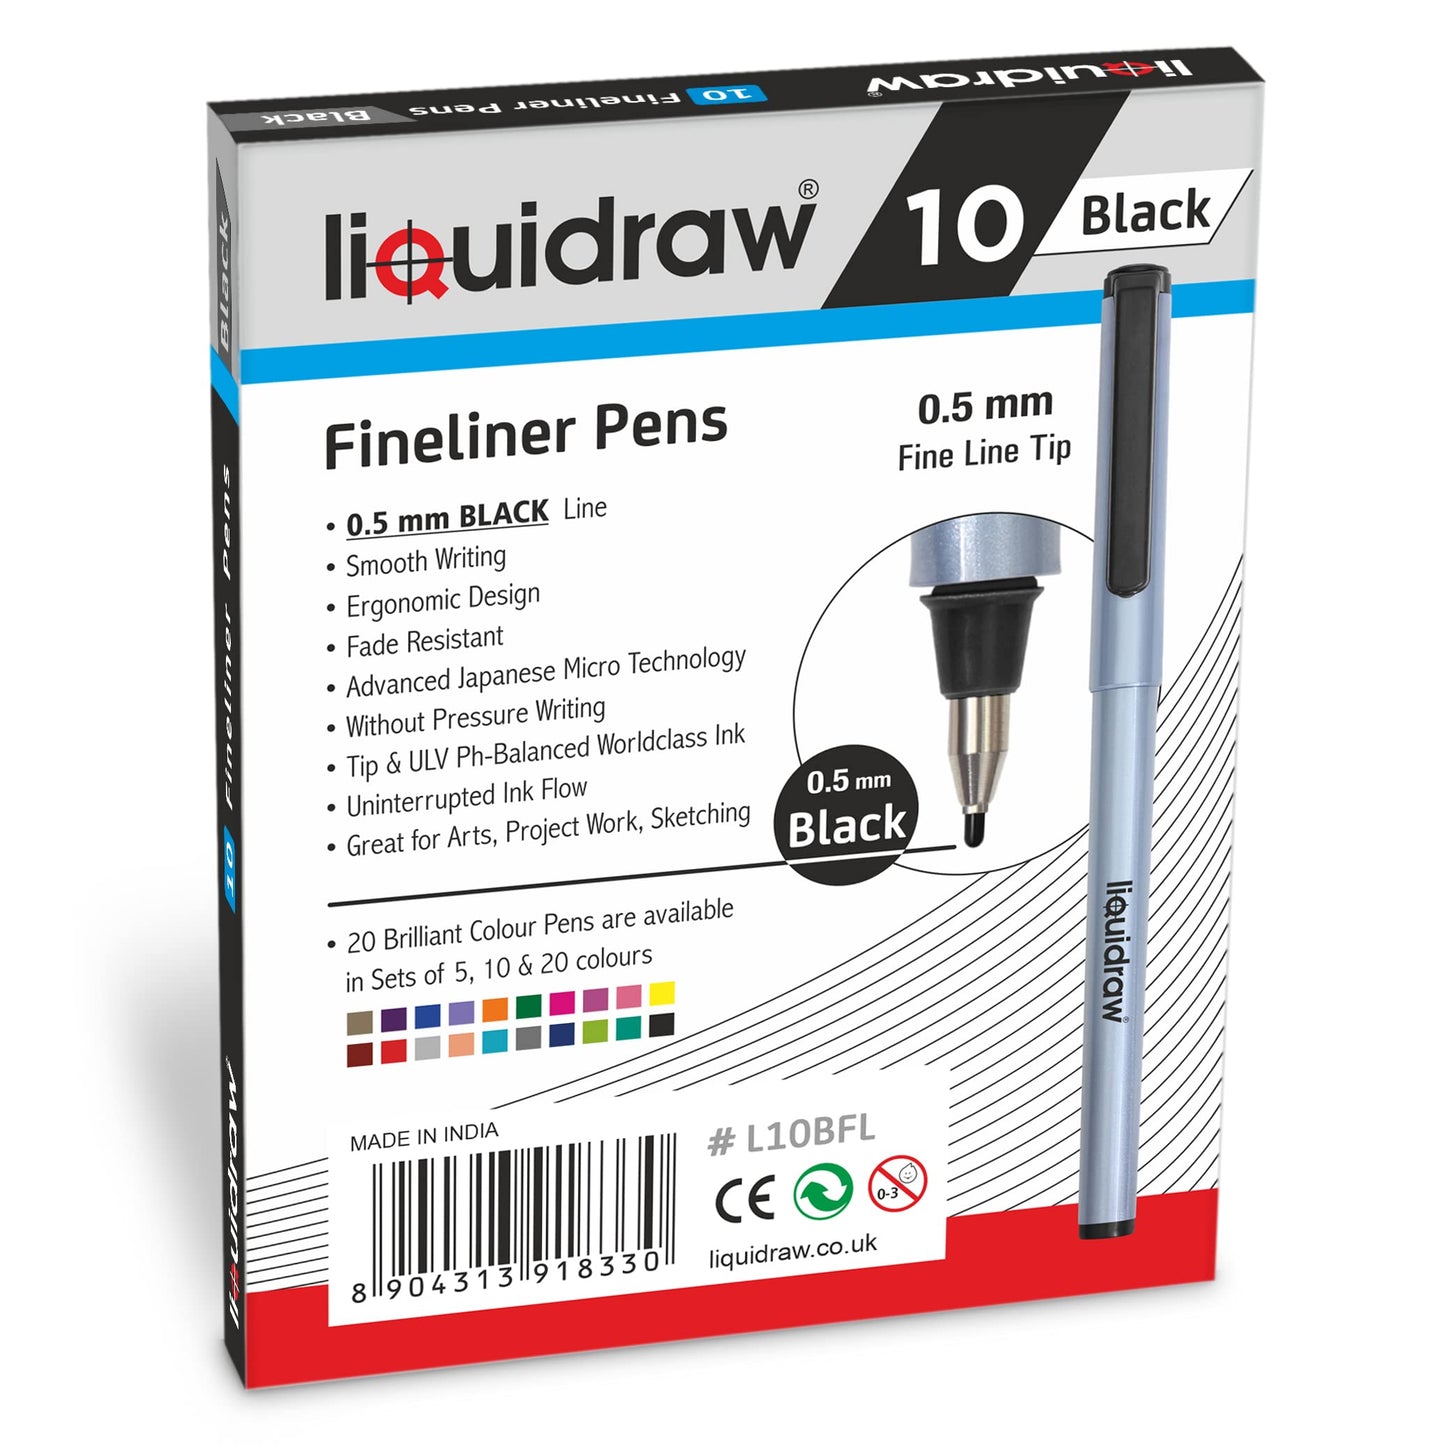 Liquidraw 10 Black Fineliner Pens Set Fine Point Pens 0.5mm Fineliners Black Coloured Pens For Artists, Architects, Technical Drawing, Handwriting, Calligraphy, Sketching, & Illustrations